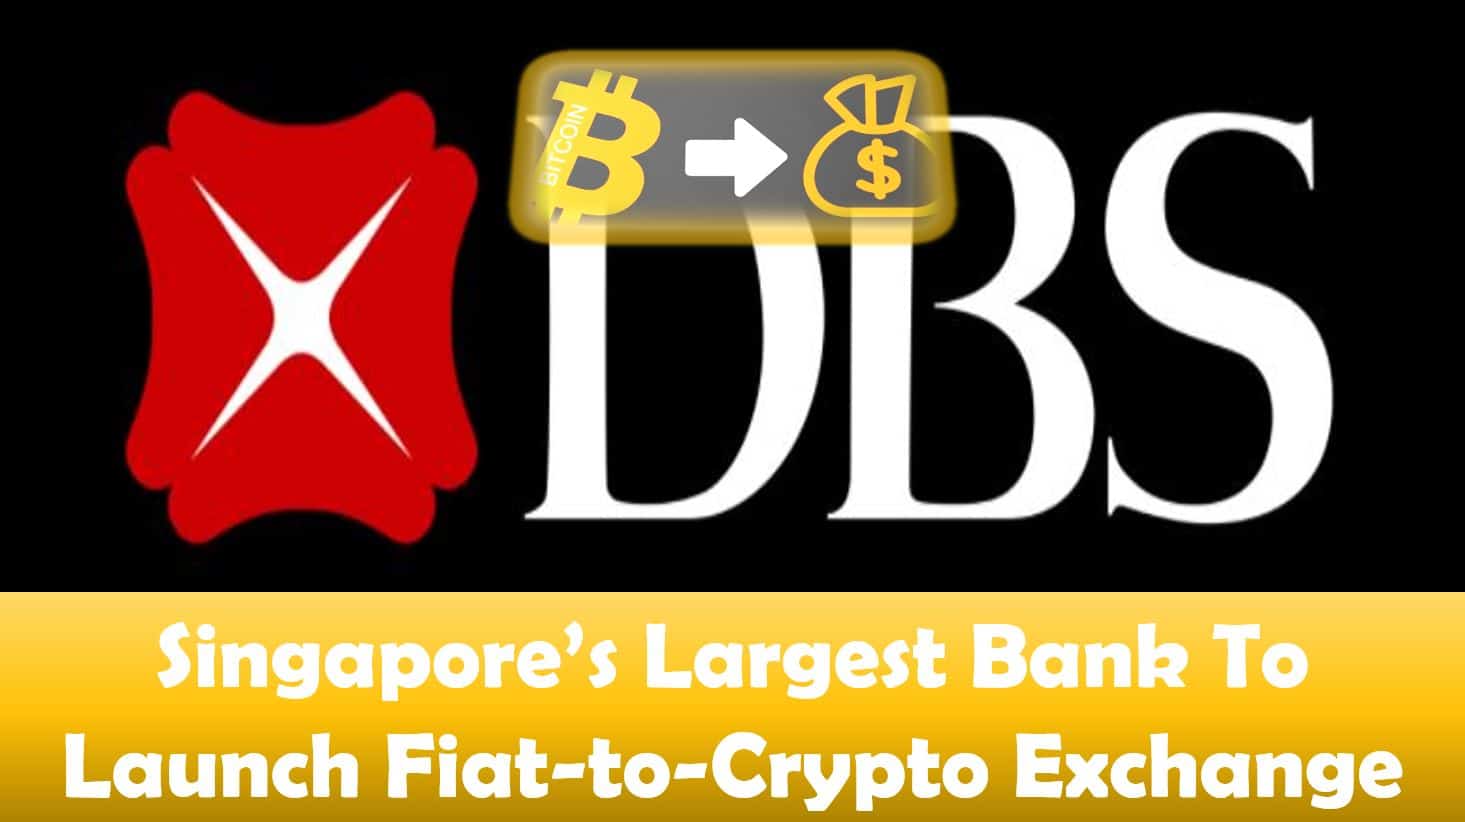 Singapore’s Largest Bank To Launch Fiat-to-Crypto Exchange